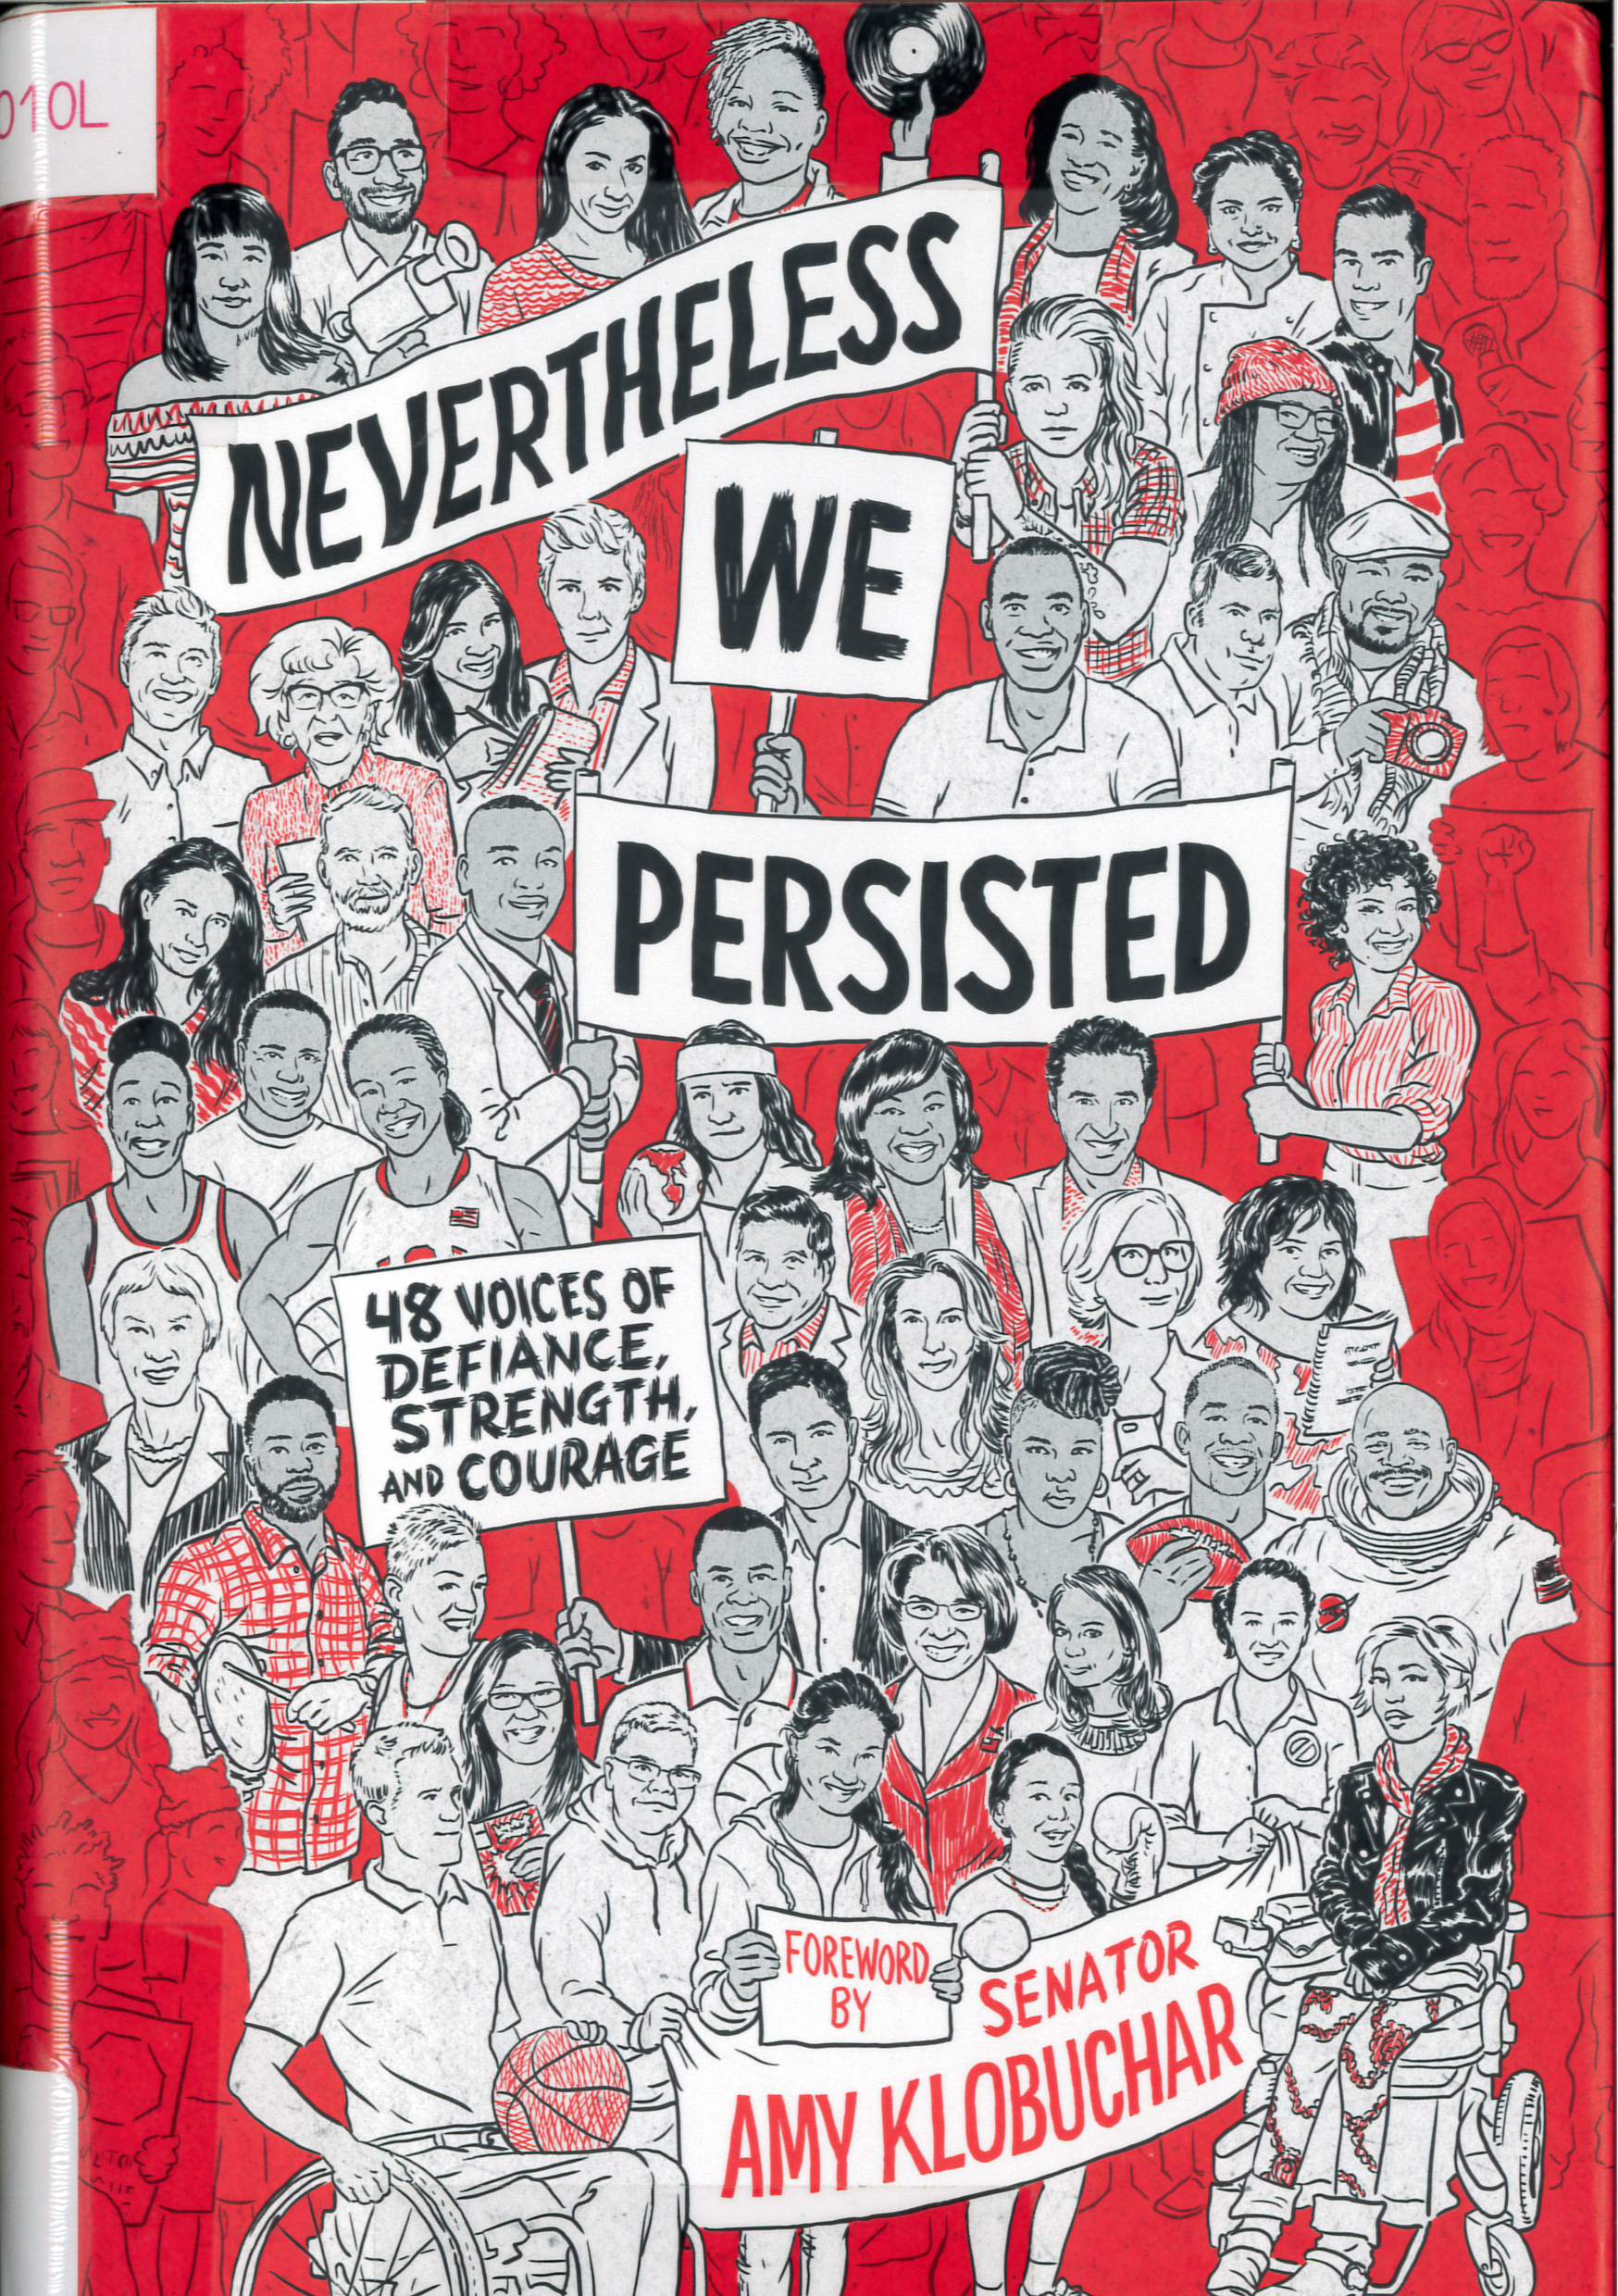 Nevertheless, we persisted : 43 voices of defiance, strength, and courage.